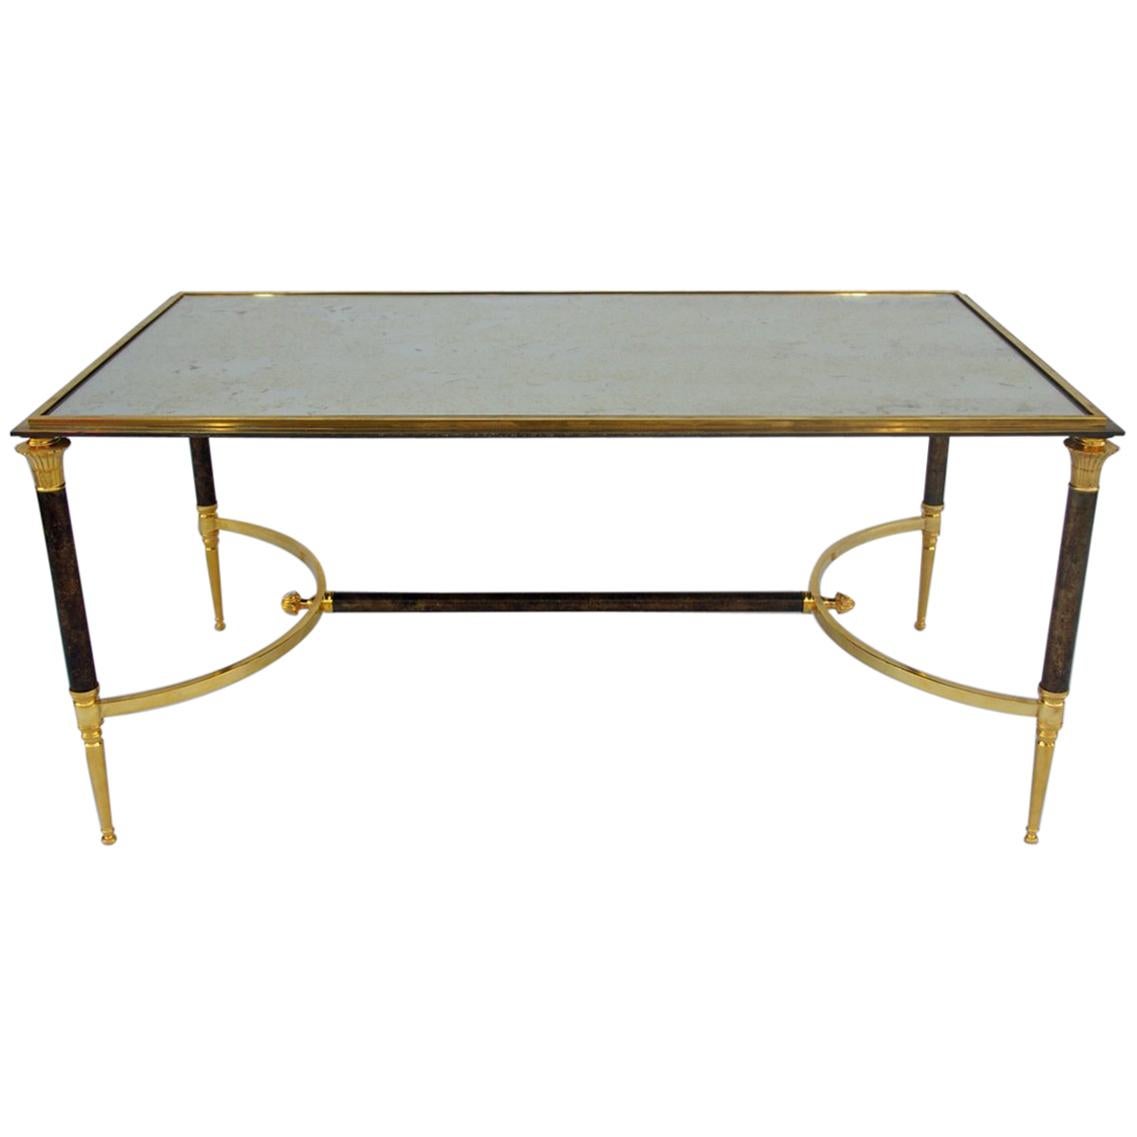 Gilt and Silvered Metal Coffee Table from Maison Jansen